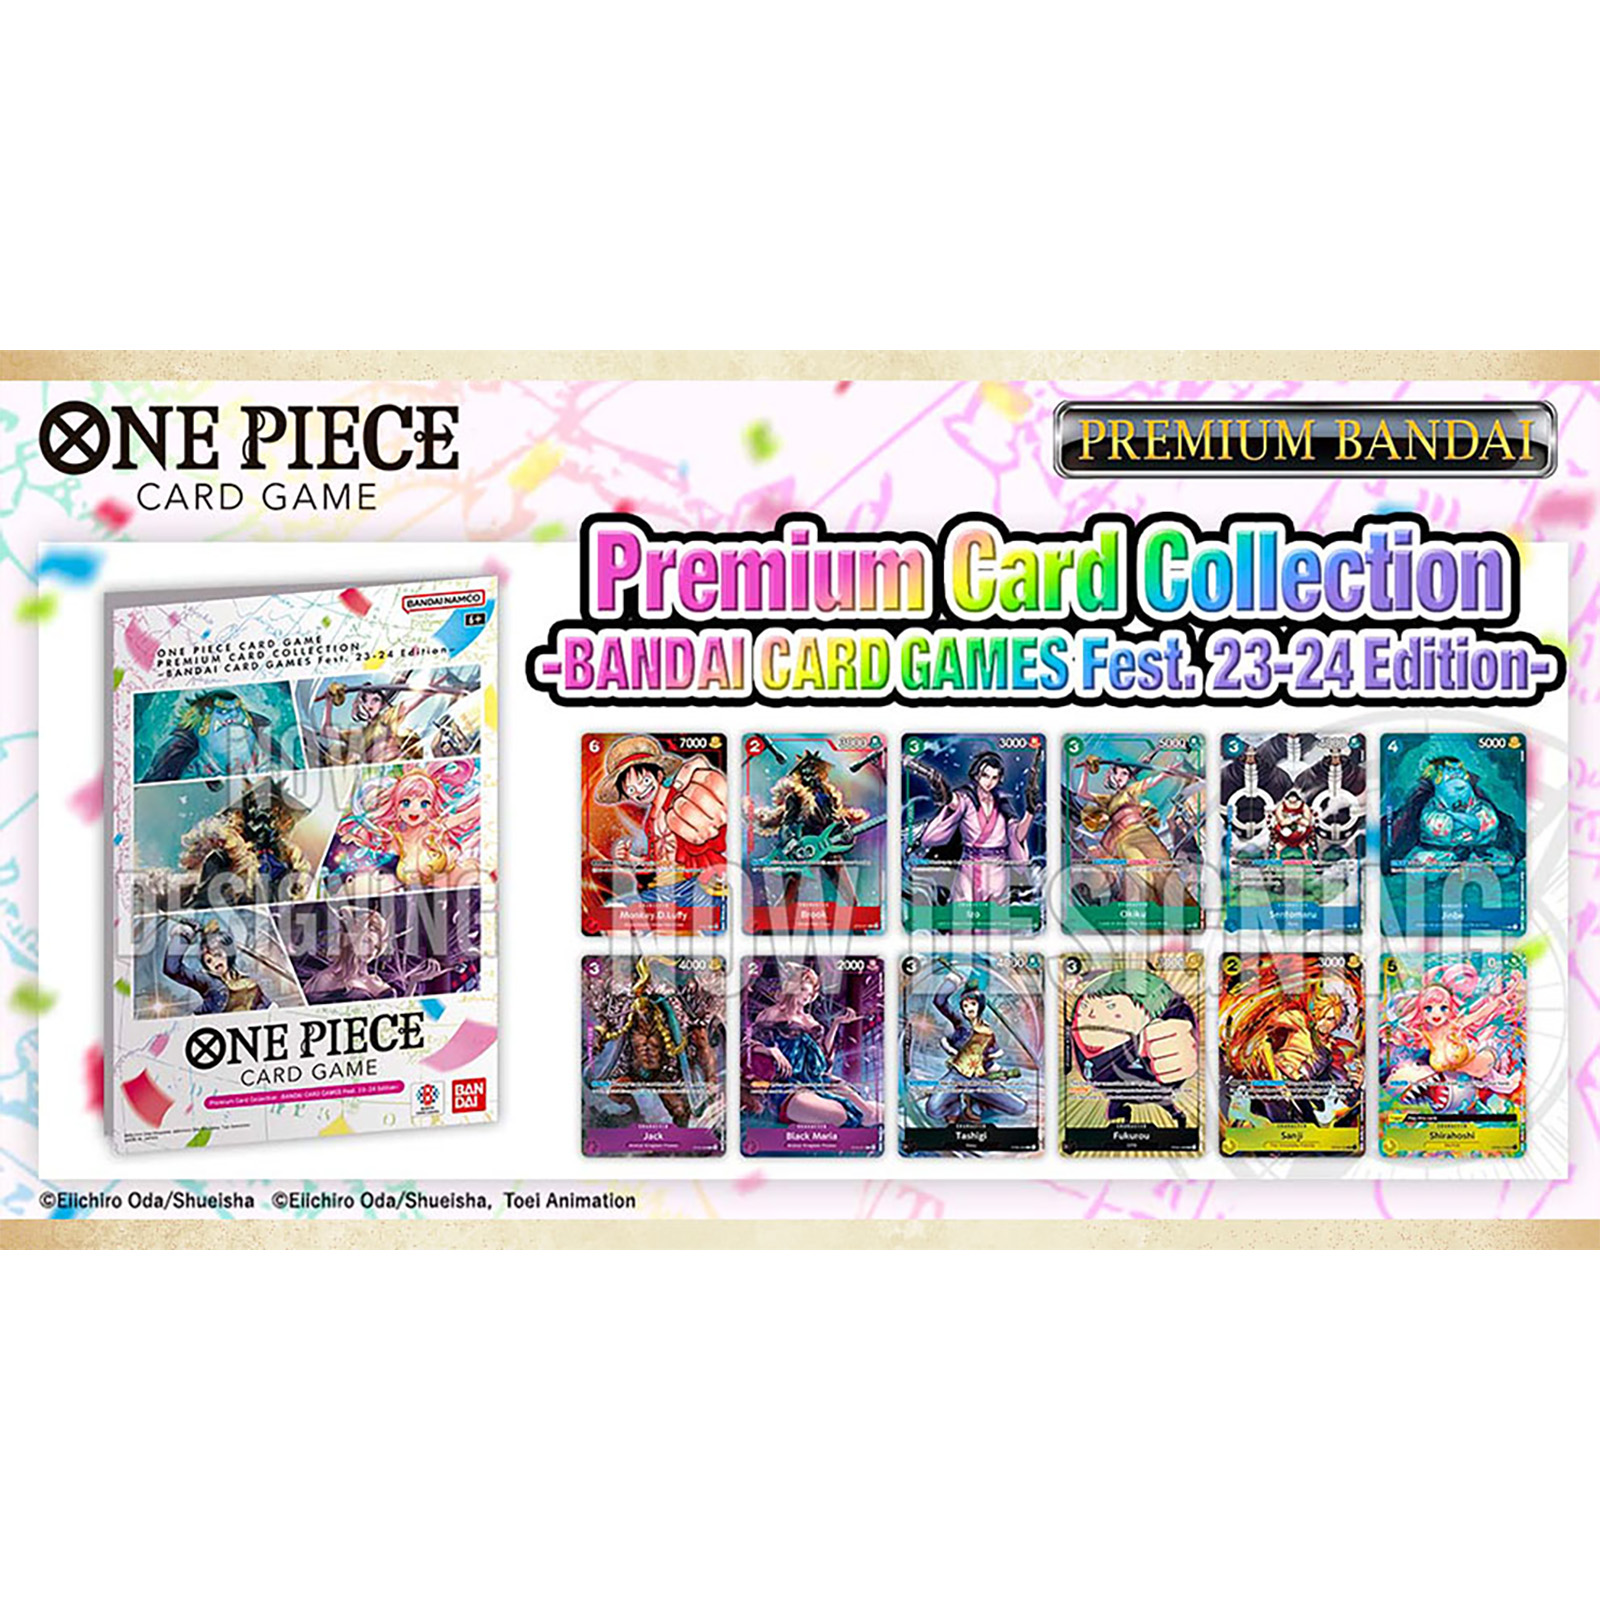 Image of One Piece Card Game: Premium Card Collection - Bandai Card Games Fest '23-'24 Edition